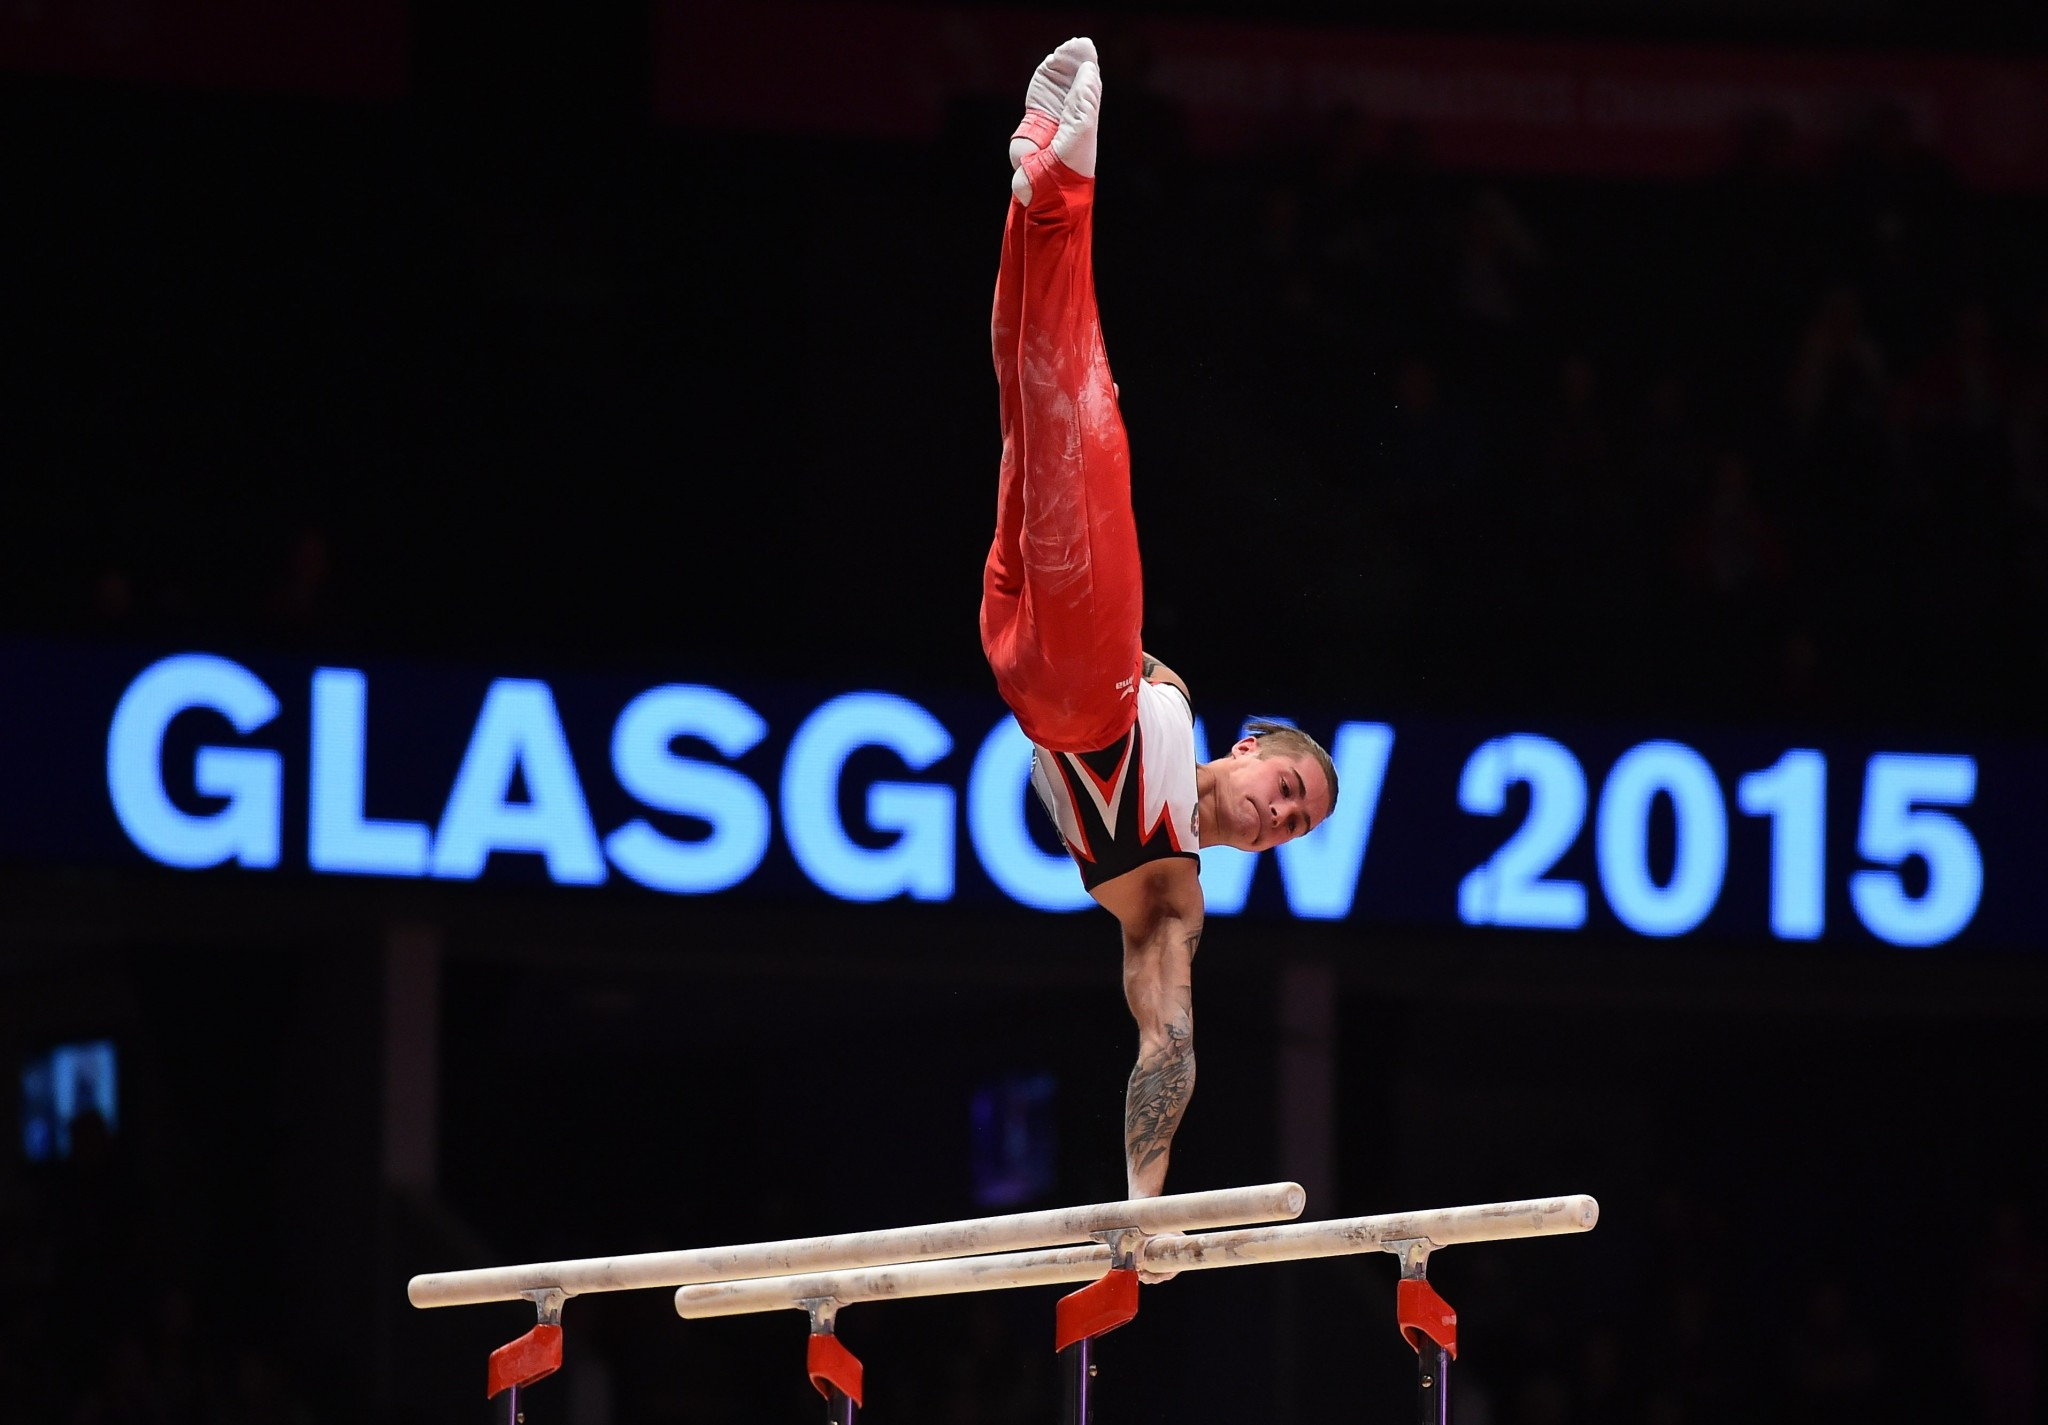 Glasgow found the right balance between sport and entertainment when the city hosted the 2015 Artistic Gymnastics World Championships ©Getty Images